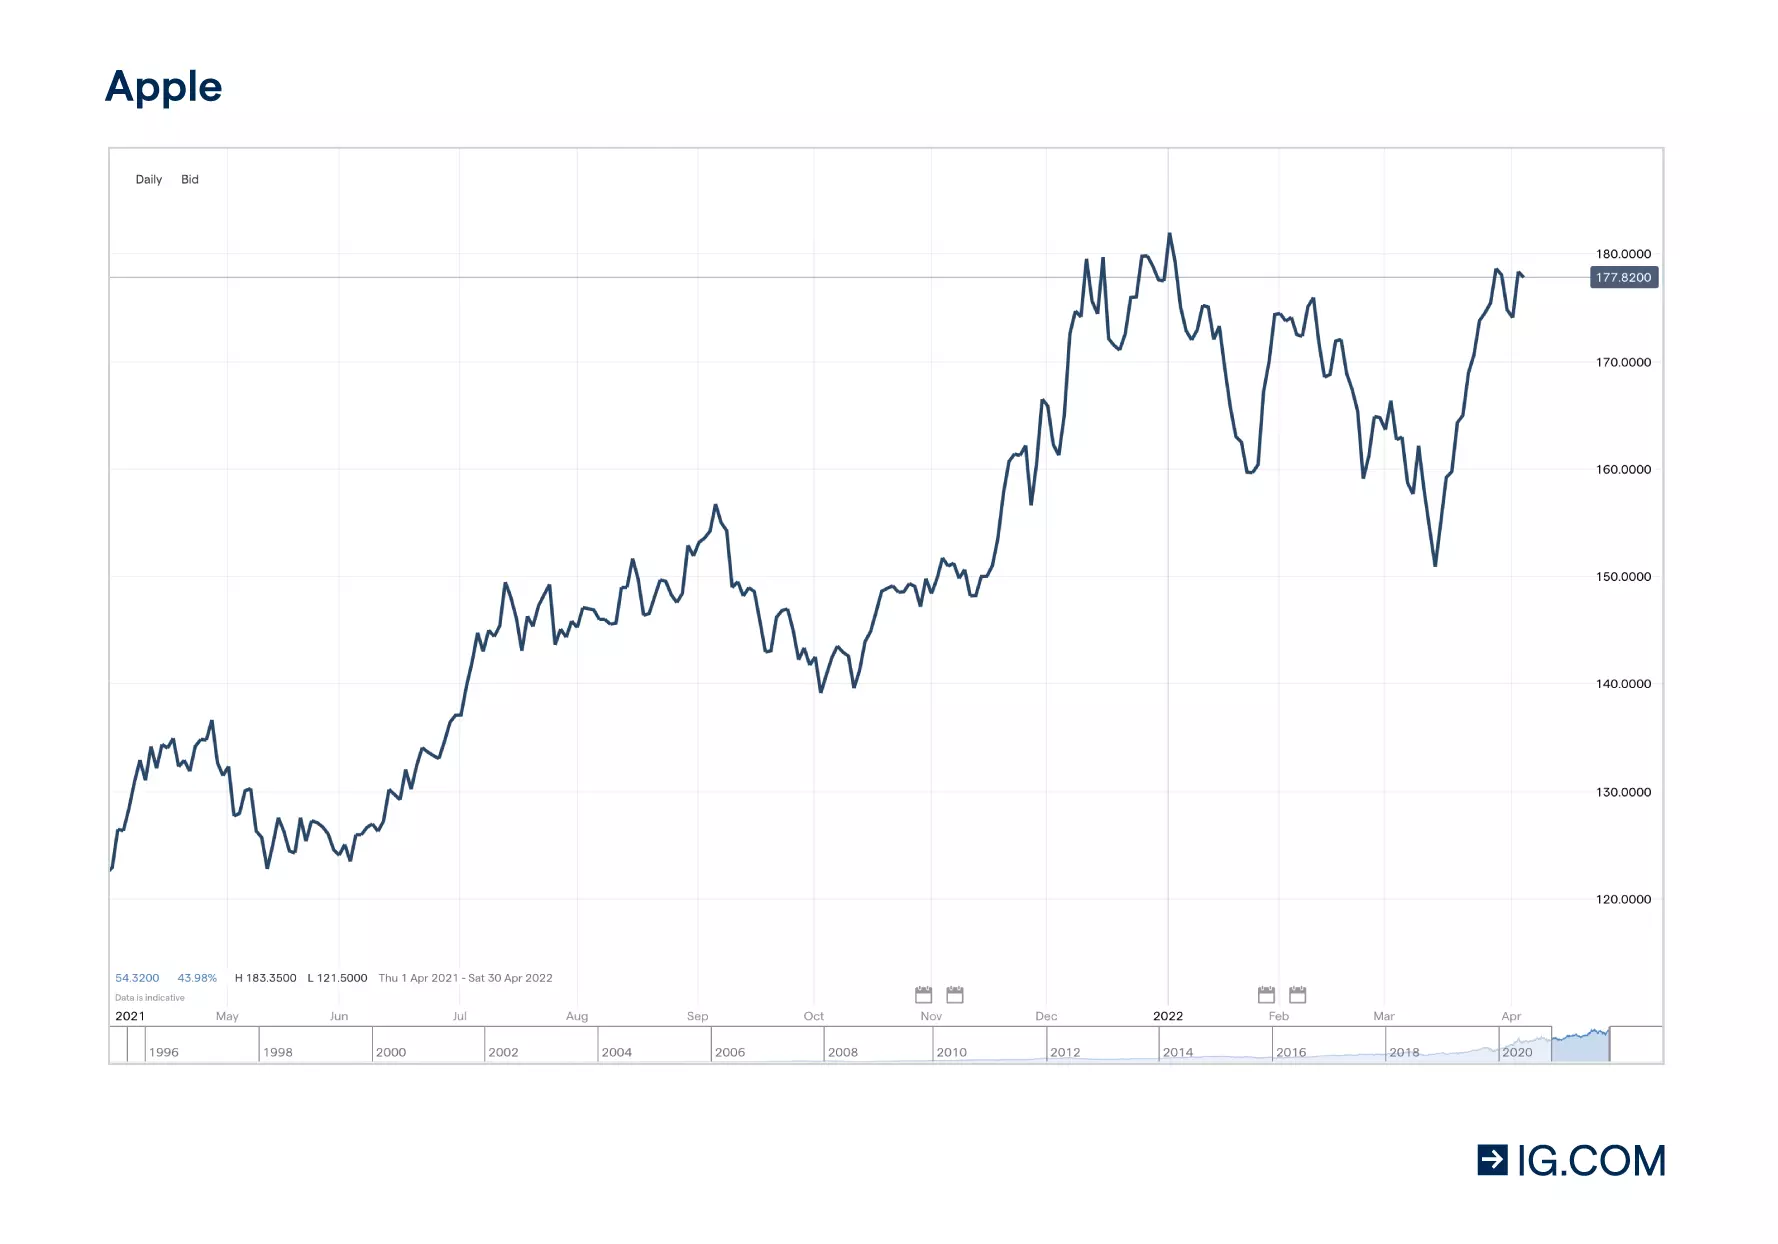 How Apple stocks has been performing over a period of one year timeline and the current share price